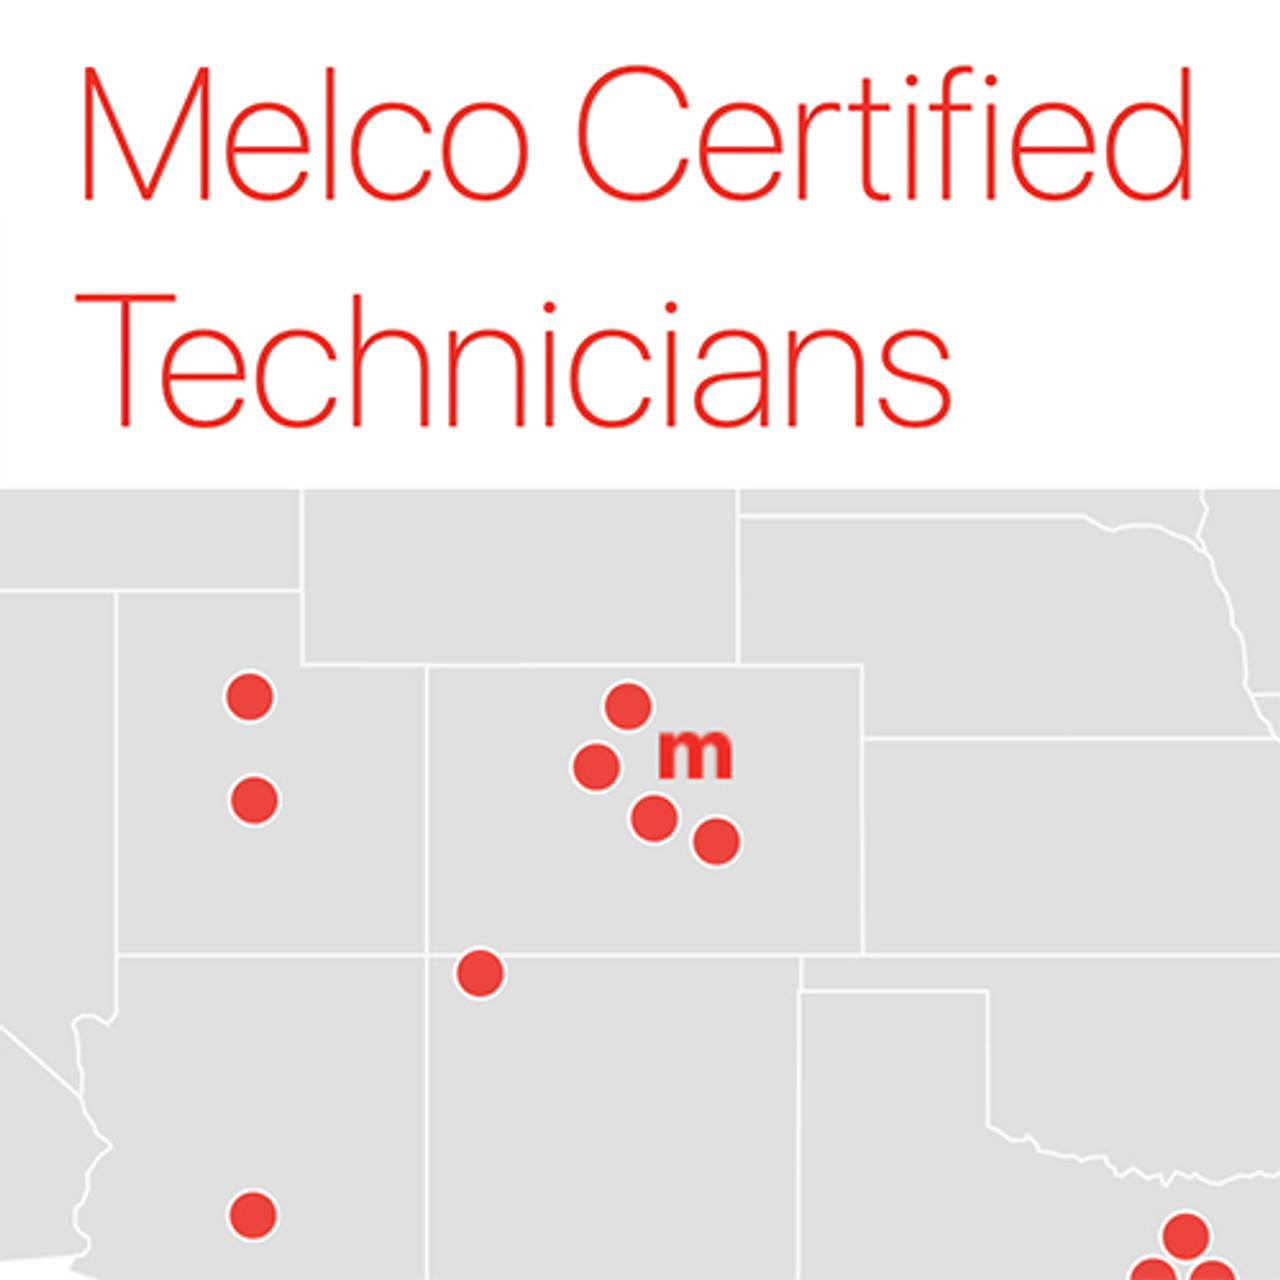 Certified Melco Technicians